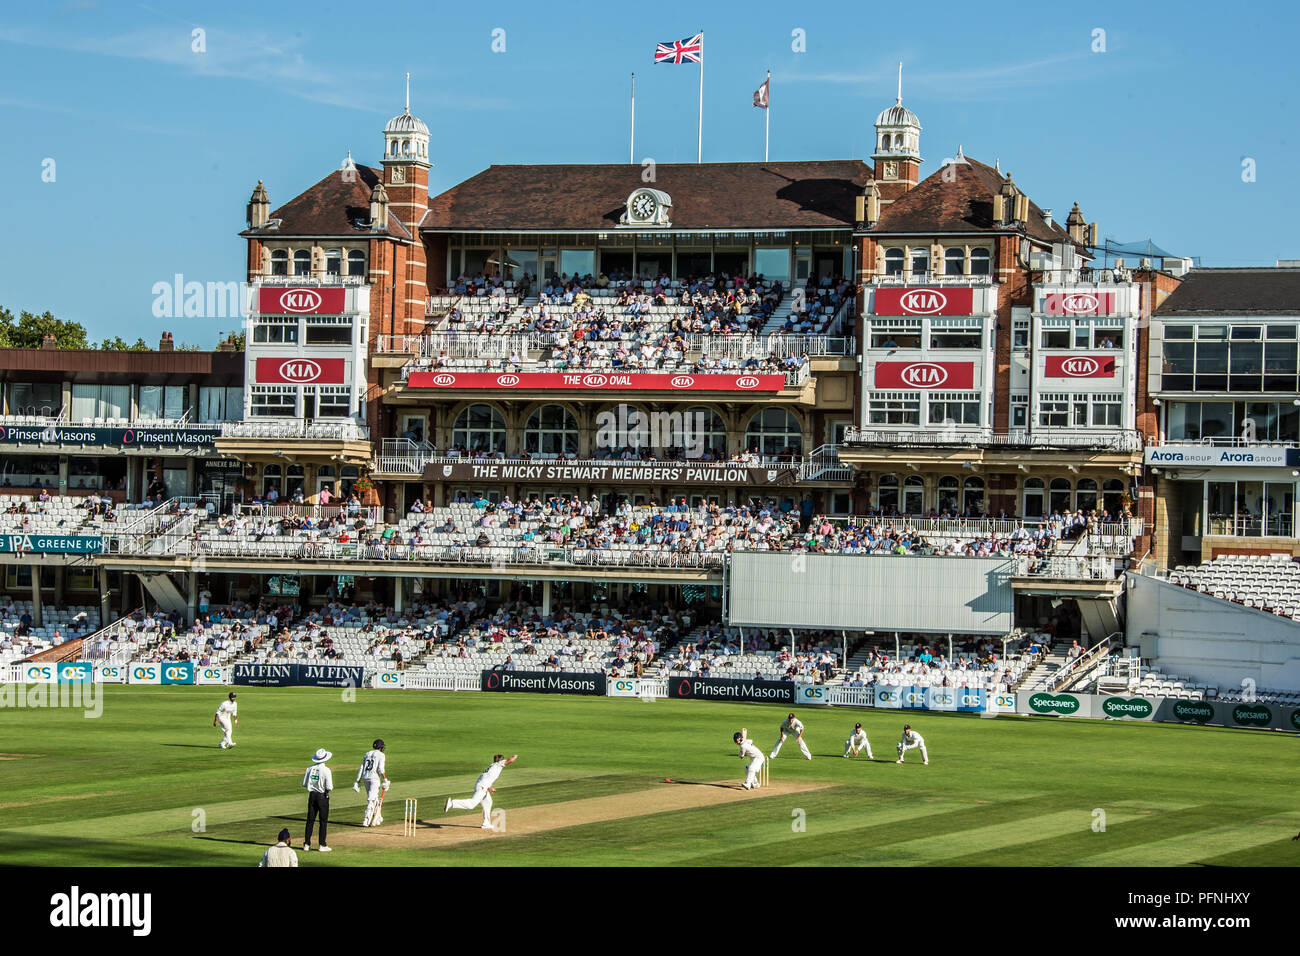 London, UK. 21 August 2018. A view of the Oval with the Micky Stewart members pavilion in the background on a sunny afternoon as Surrey take on Lancashire on day three of the Specsavers County Championship day/night game at the Oval with a pink ball. David Rowe/Alamy Live News Stock Photo